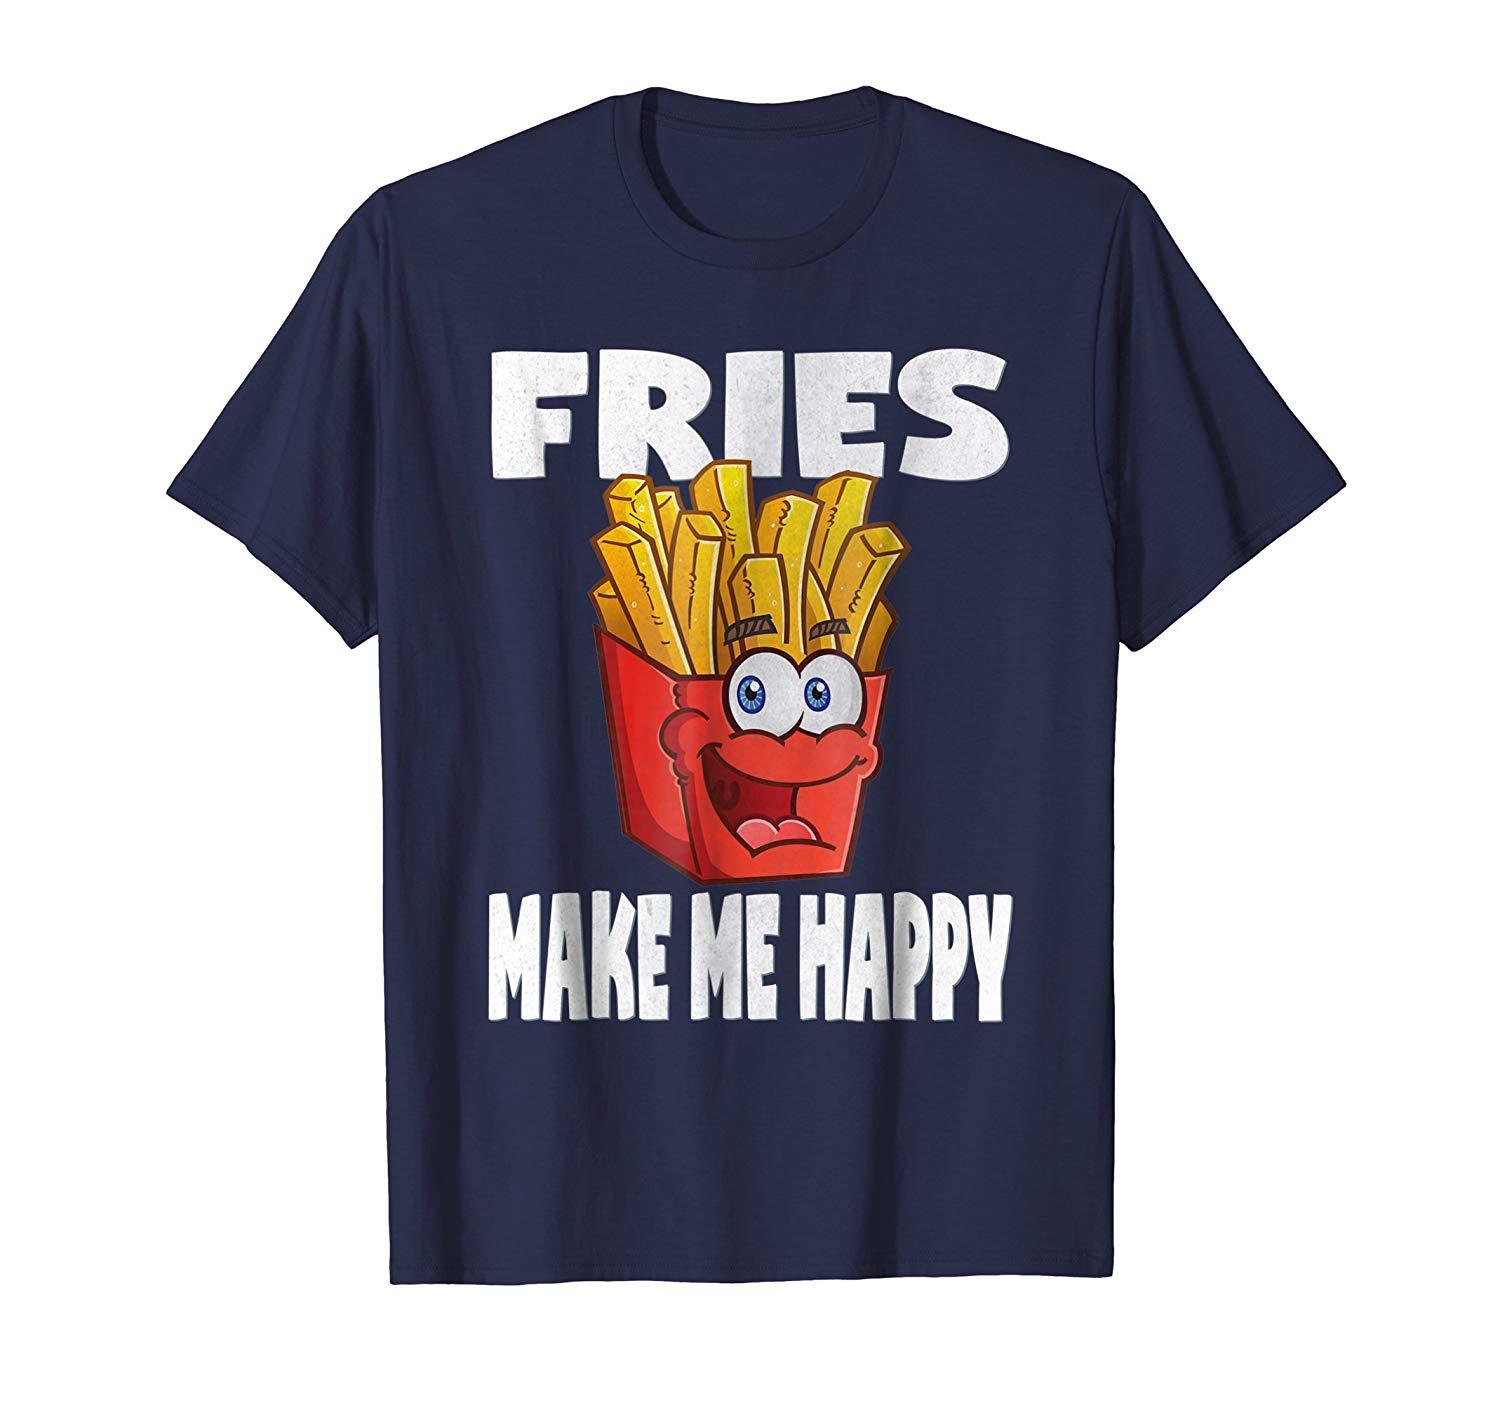 New Shirt - Fries Make Me Happy Funny Cute Vintage French Fry T-Shirt ...